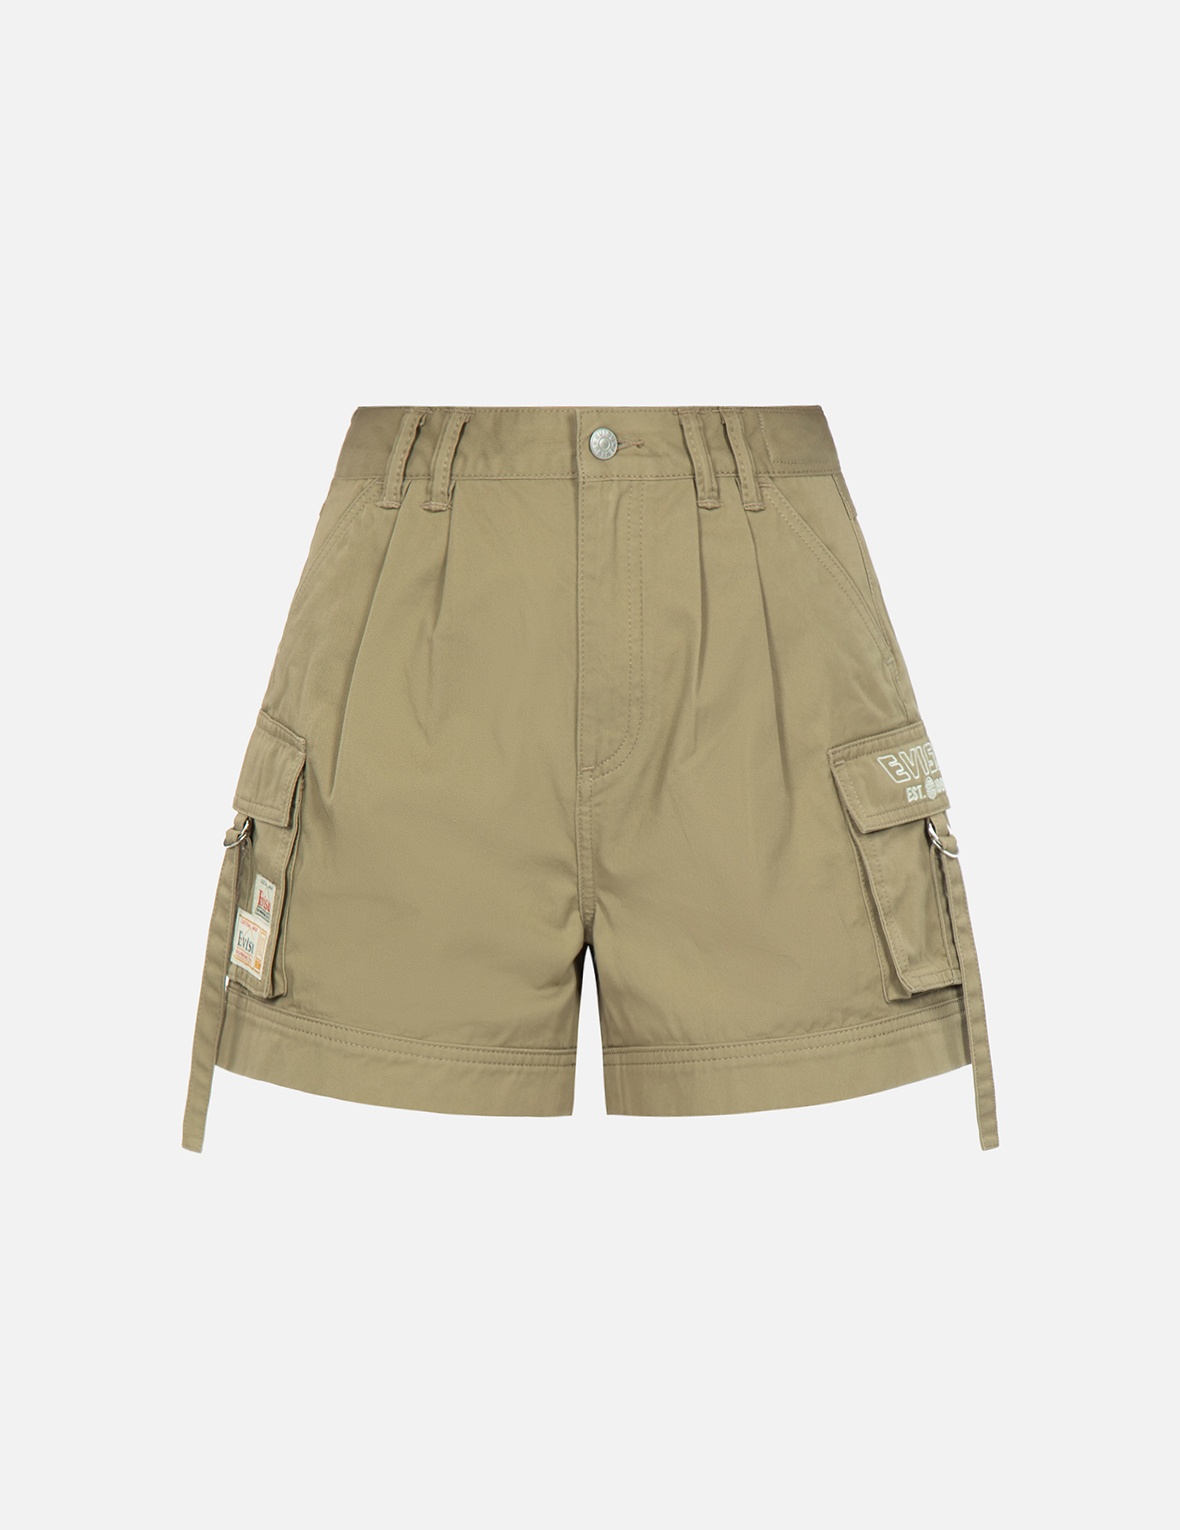 SEAGULL AND LOGO EMBROIDERY CARGO SHORTS - 1